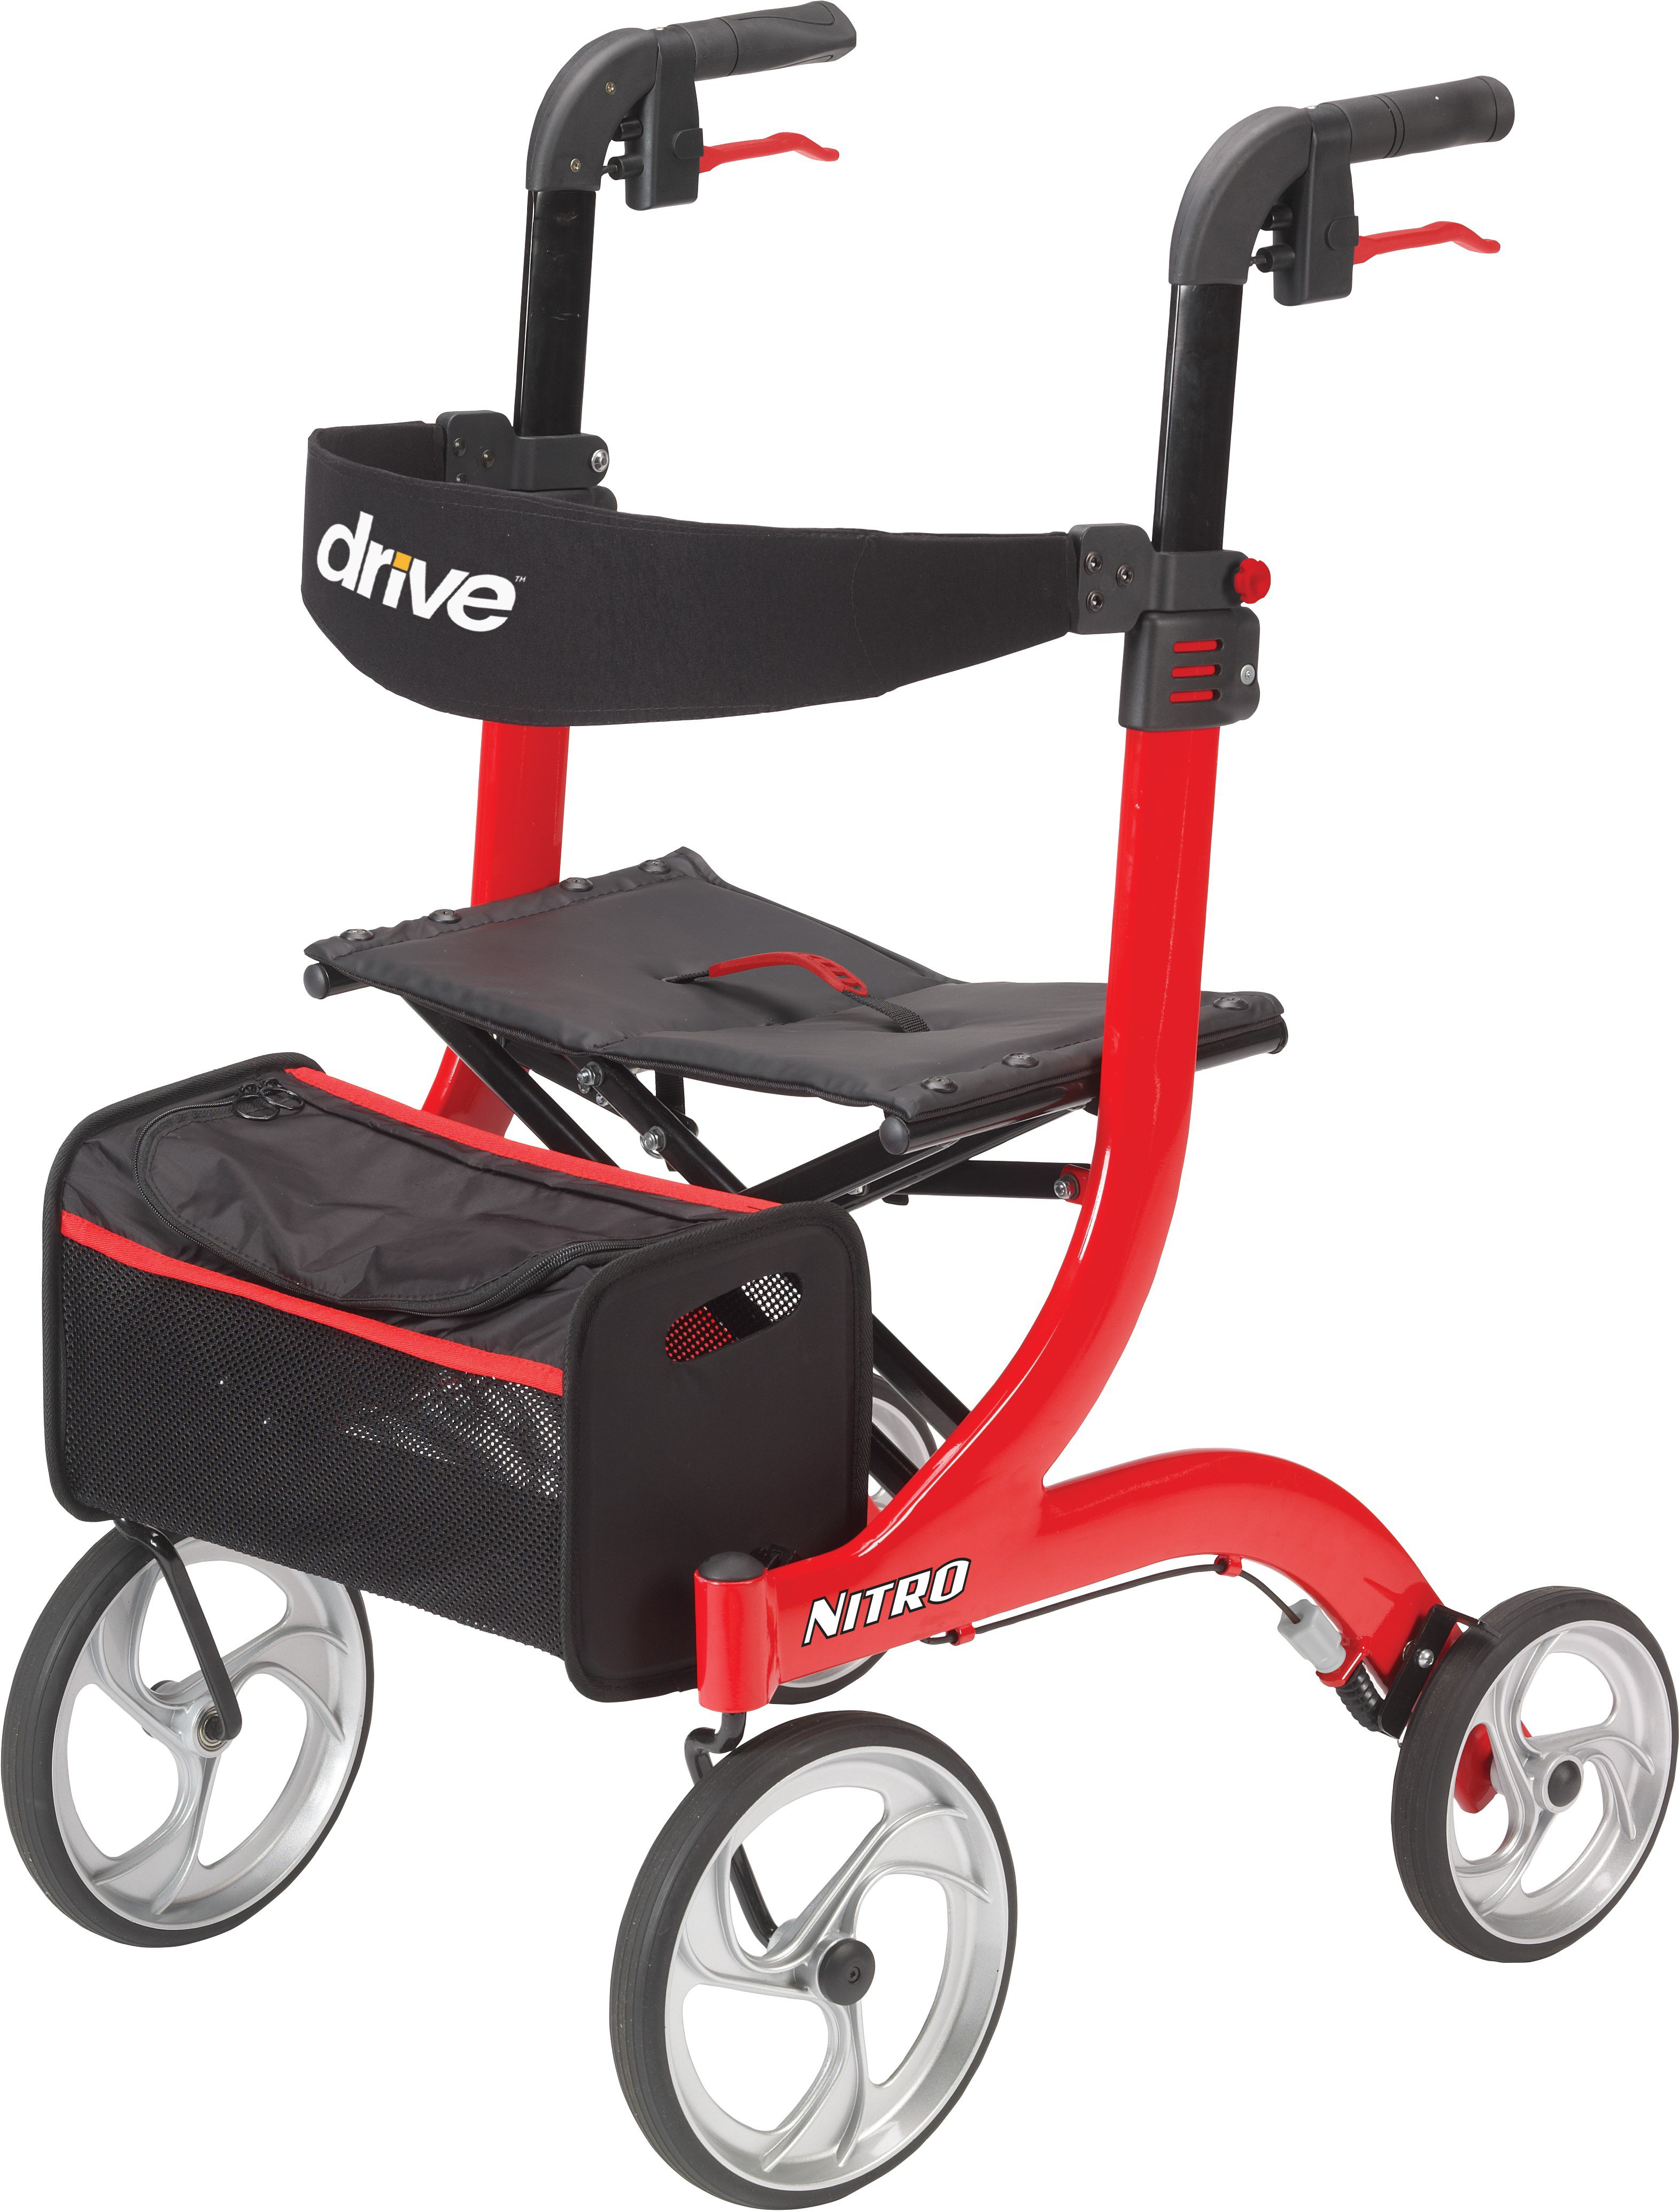 drive Nitro Rollator / Rolling Walker, 4 Wheels - Aluminum Frame,  Adjustable Height - Red, 33.5 in to 38.25 in Handle Height